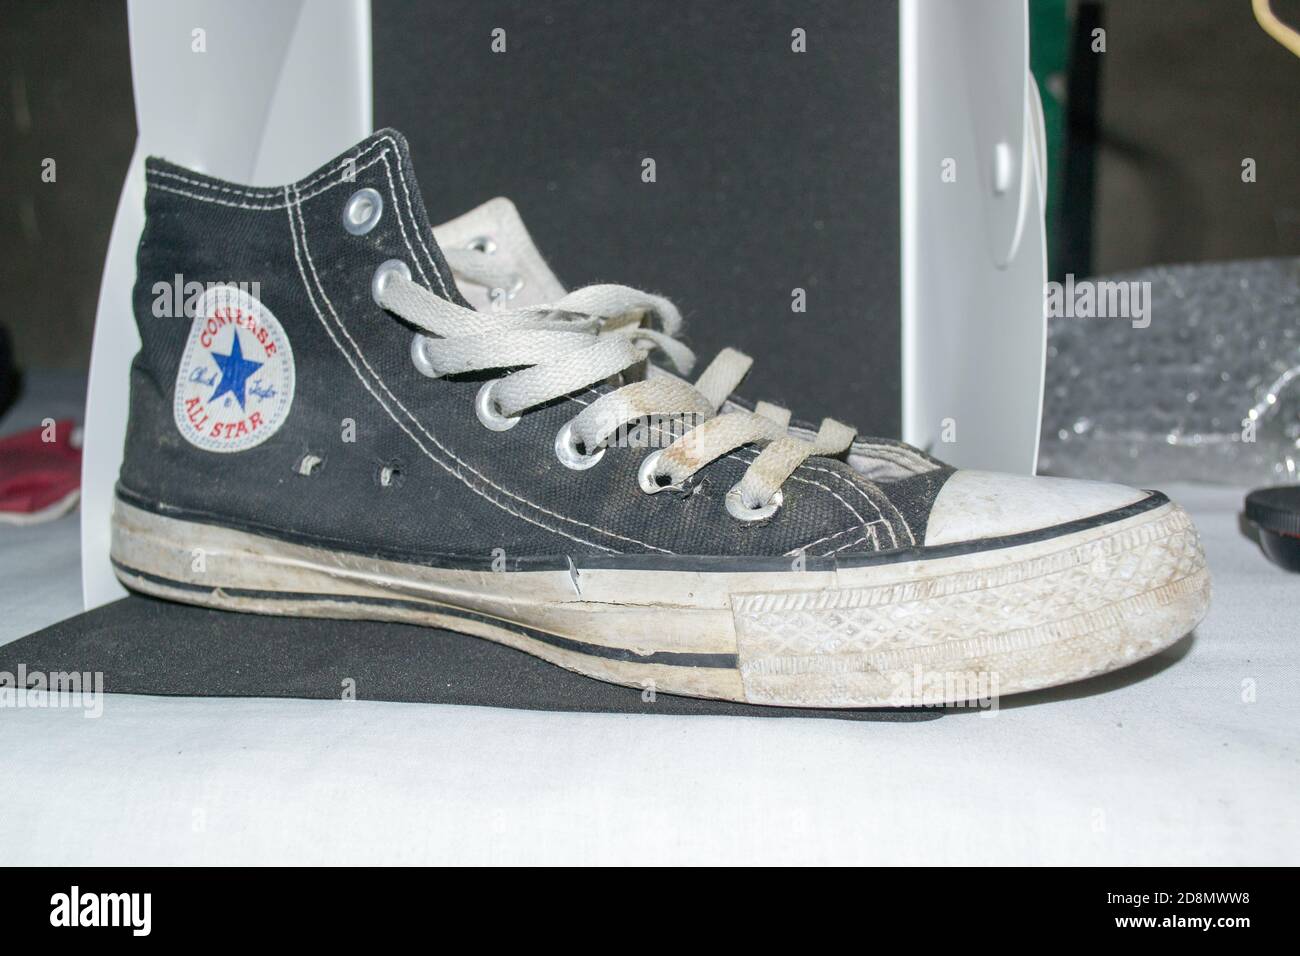 old dirty pair of high cut converse all star shoes which was initially  developed as basketball shoes before. Famous shoes made by chuck taylor  Stock Photo - Alamy